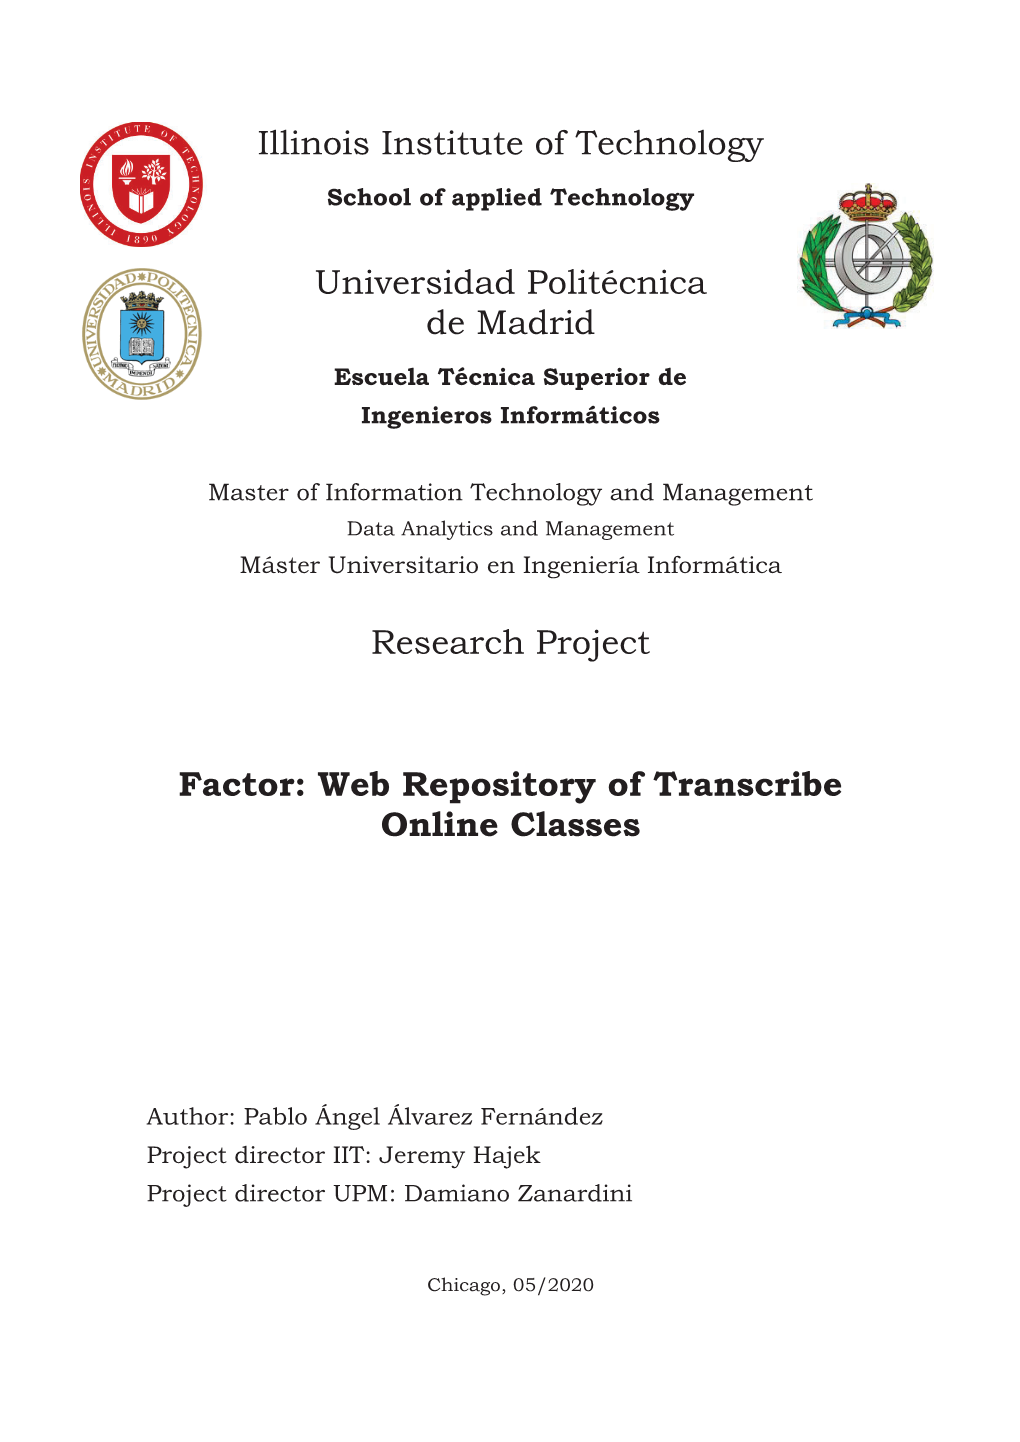 Web Repository of Transcribe Online Classes